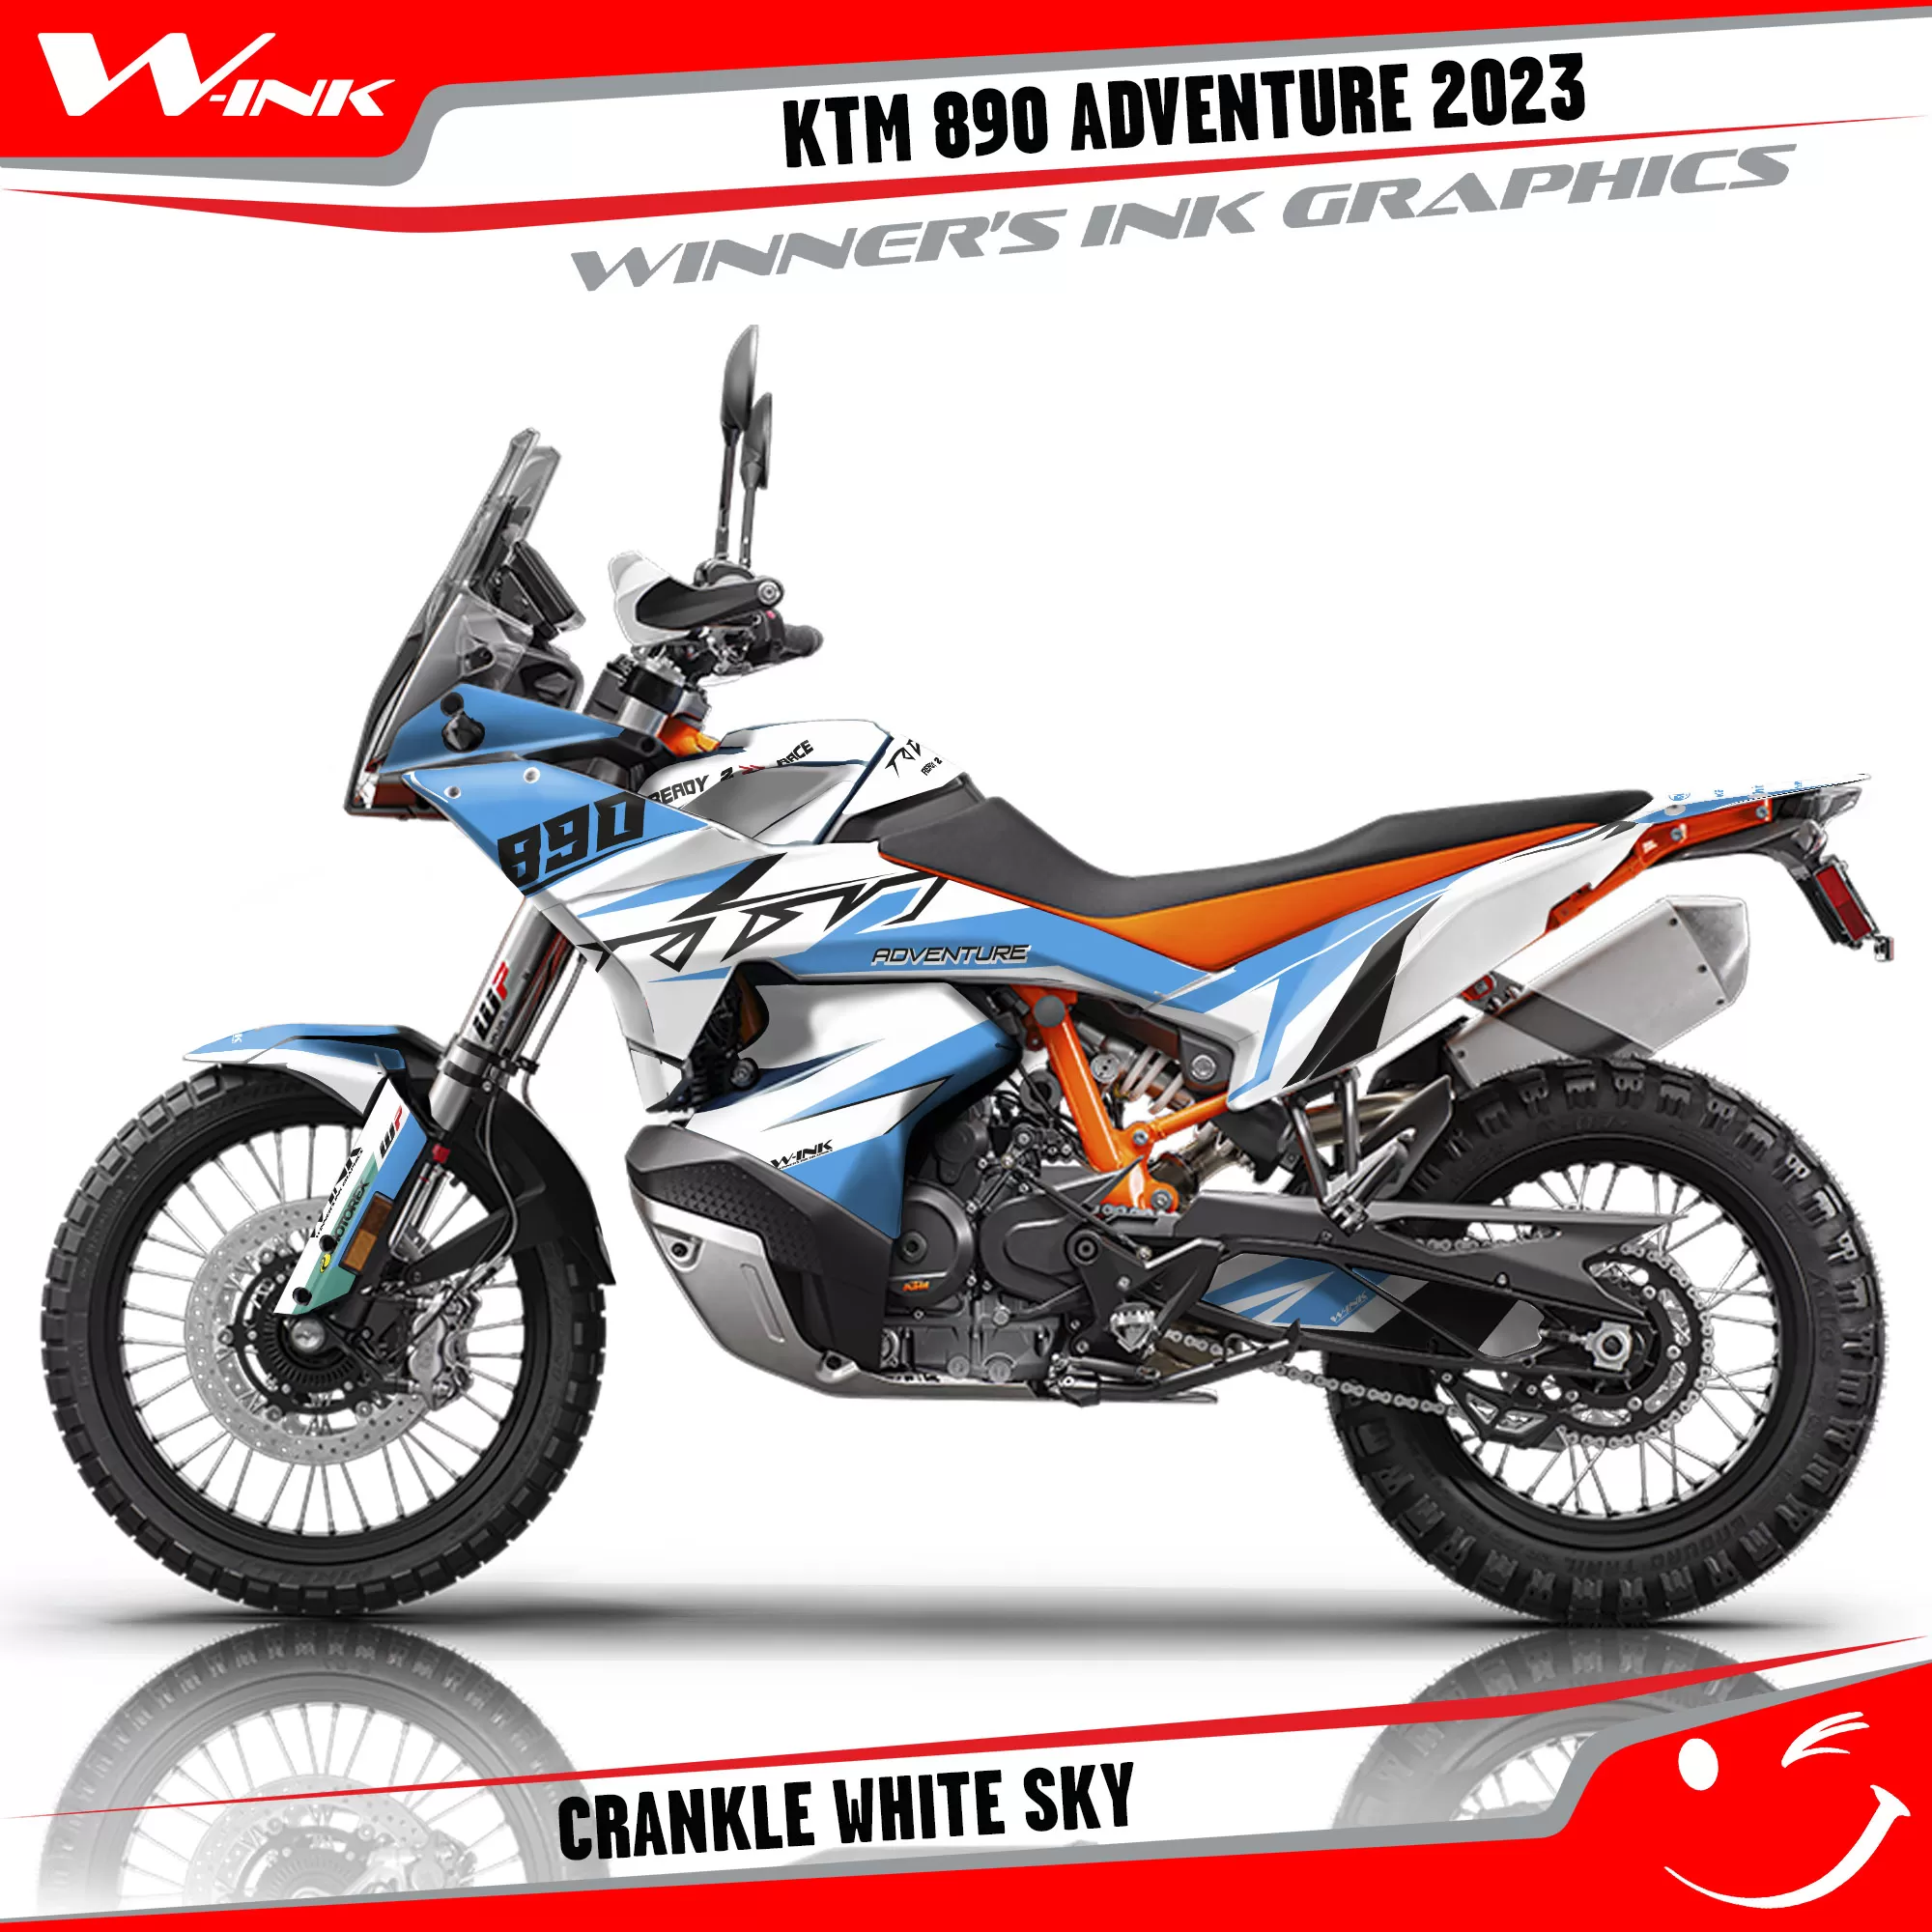 Adventure-890-2023-graphics-kit-and-decals-with-design-Crankle-White-Sky